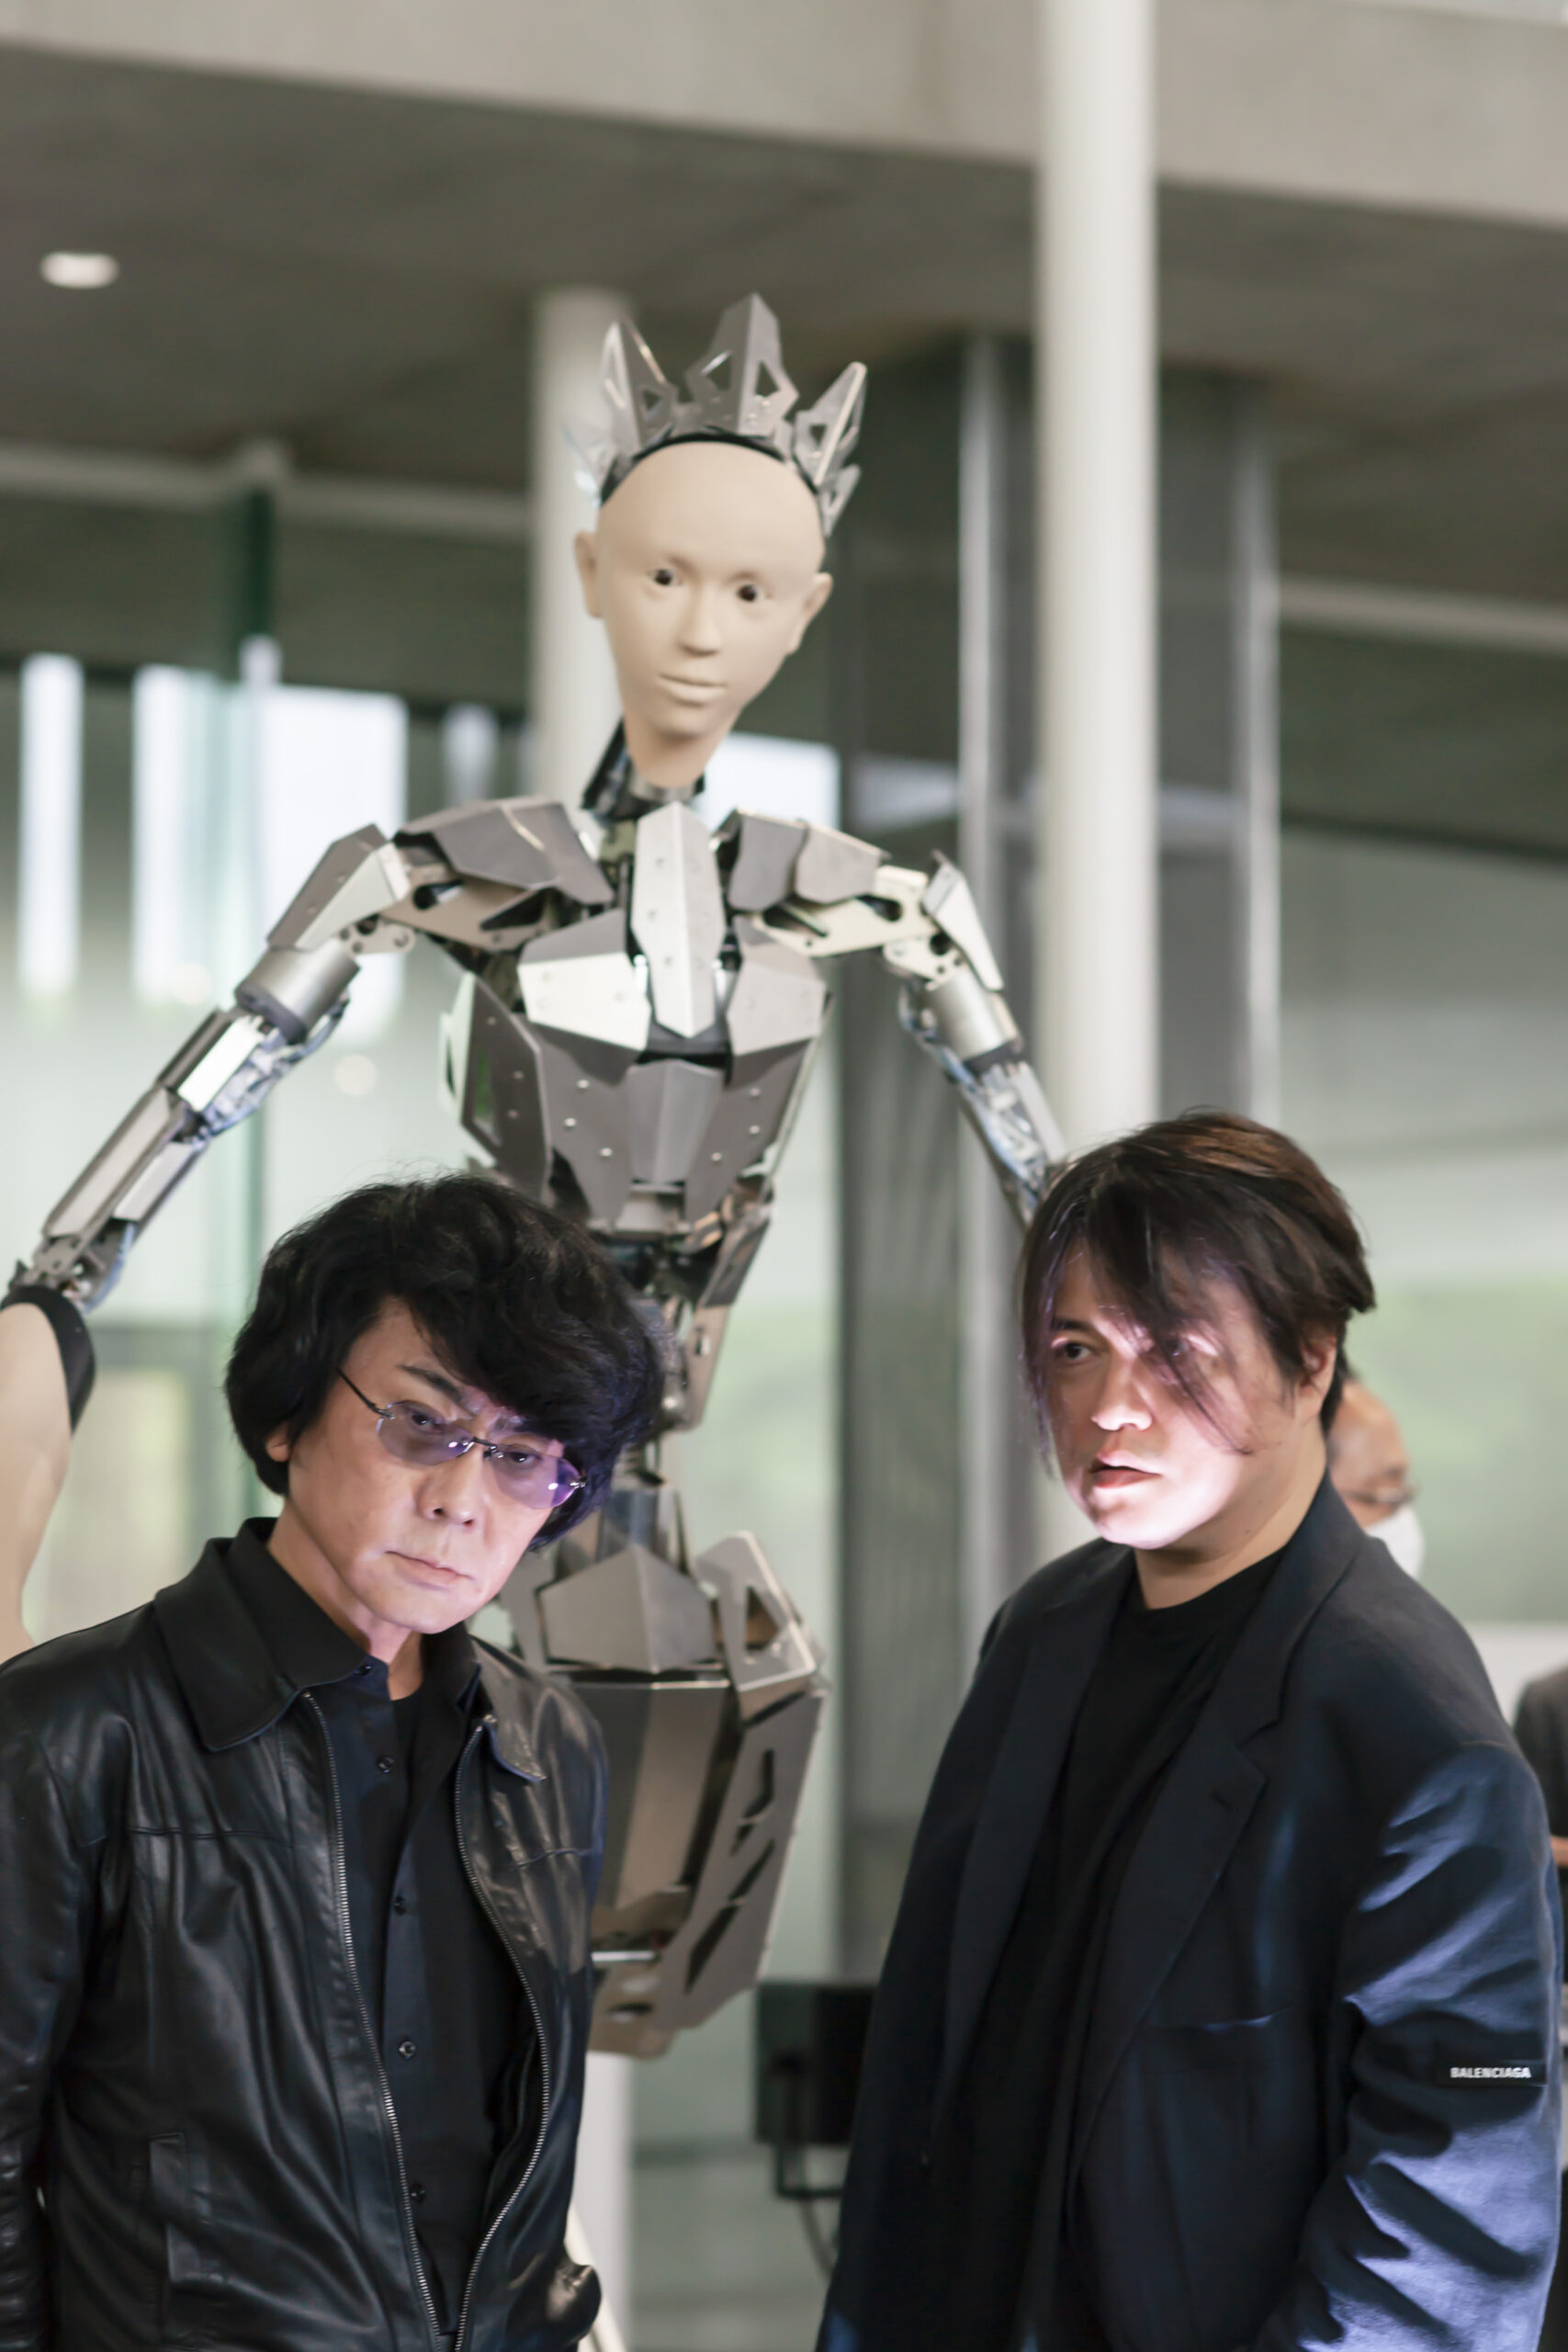 From left to right: Ishiguro, Alter4, and Shibuya. Ishiguro is also the thematic producer of Expo 2025, with the theme being “Amplification of Lives” Photography Kenshu Shintsubo